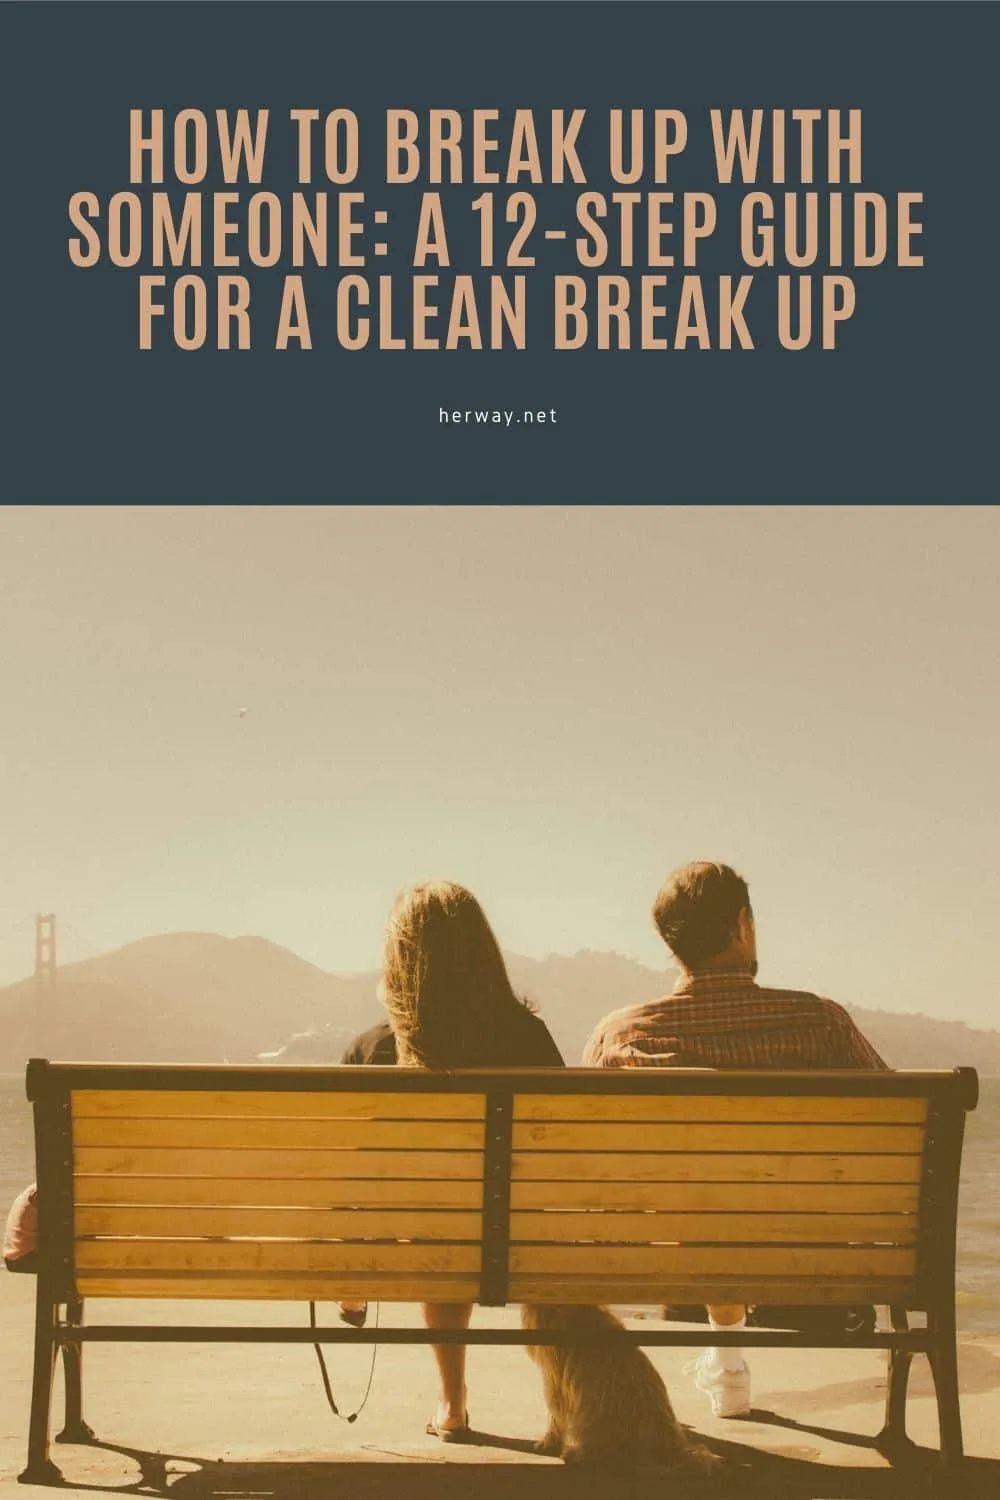 How To Break Up With Someone: A 12-Step Guide For A Clean Break Up